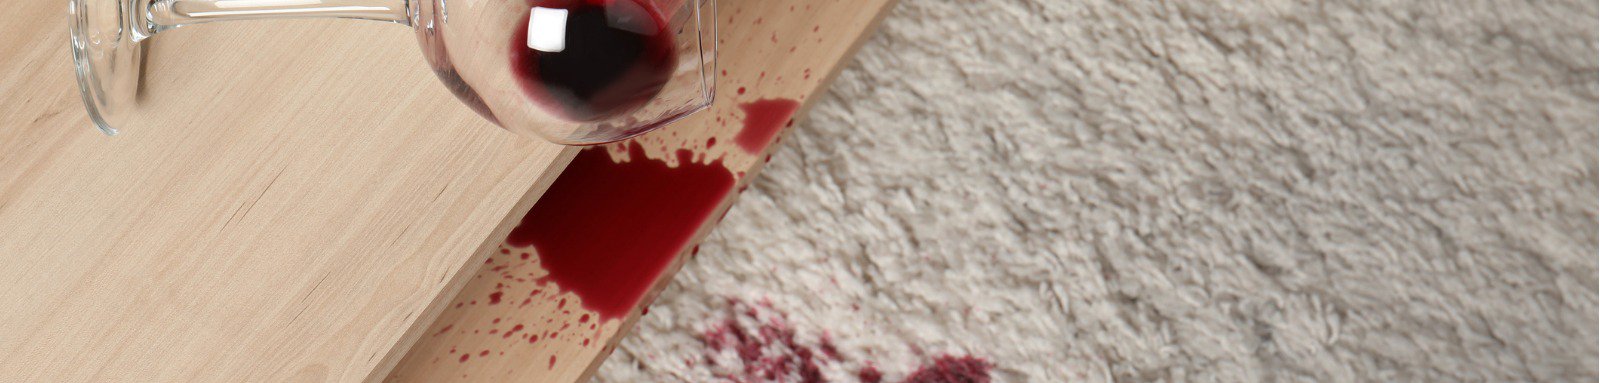 Overturned glass and spilled red wine on white carpet indoors